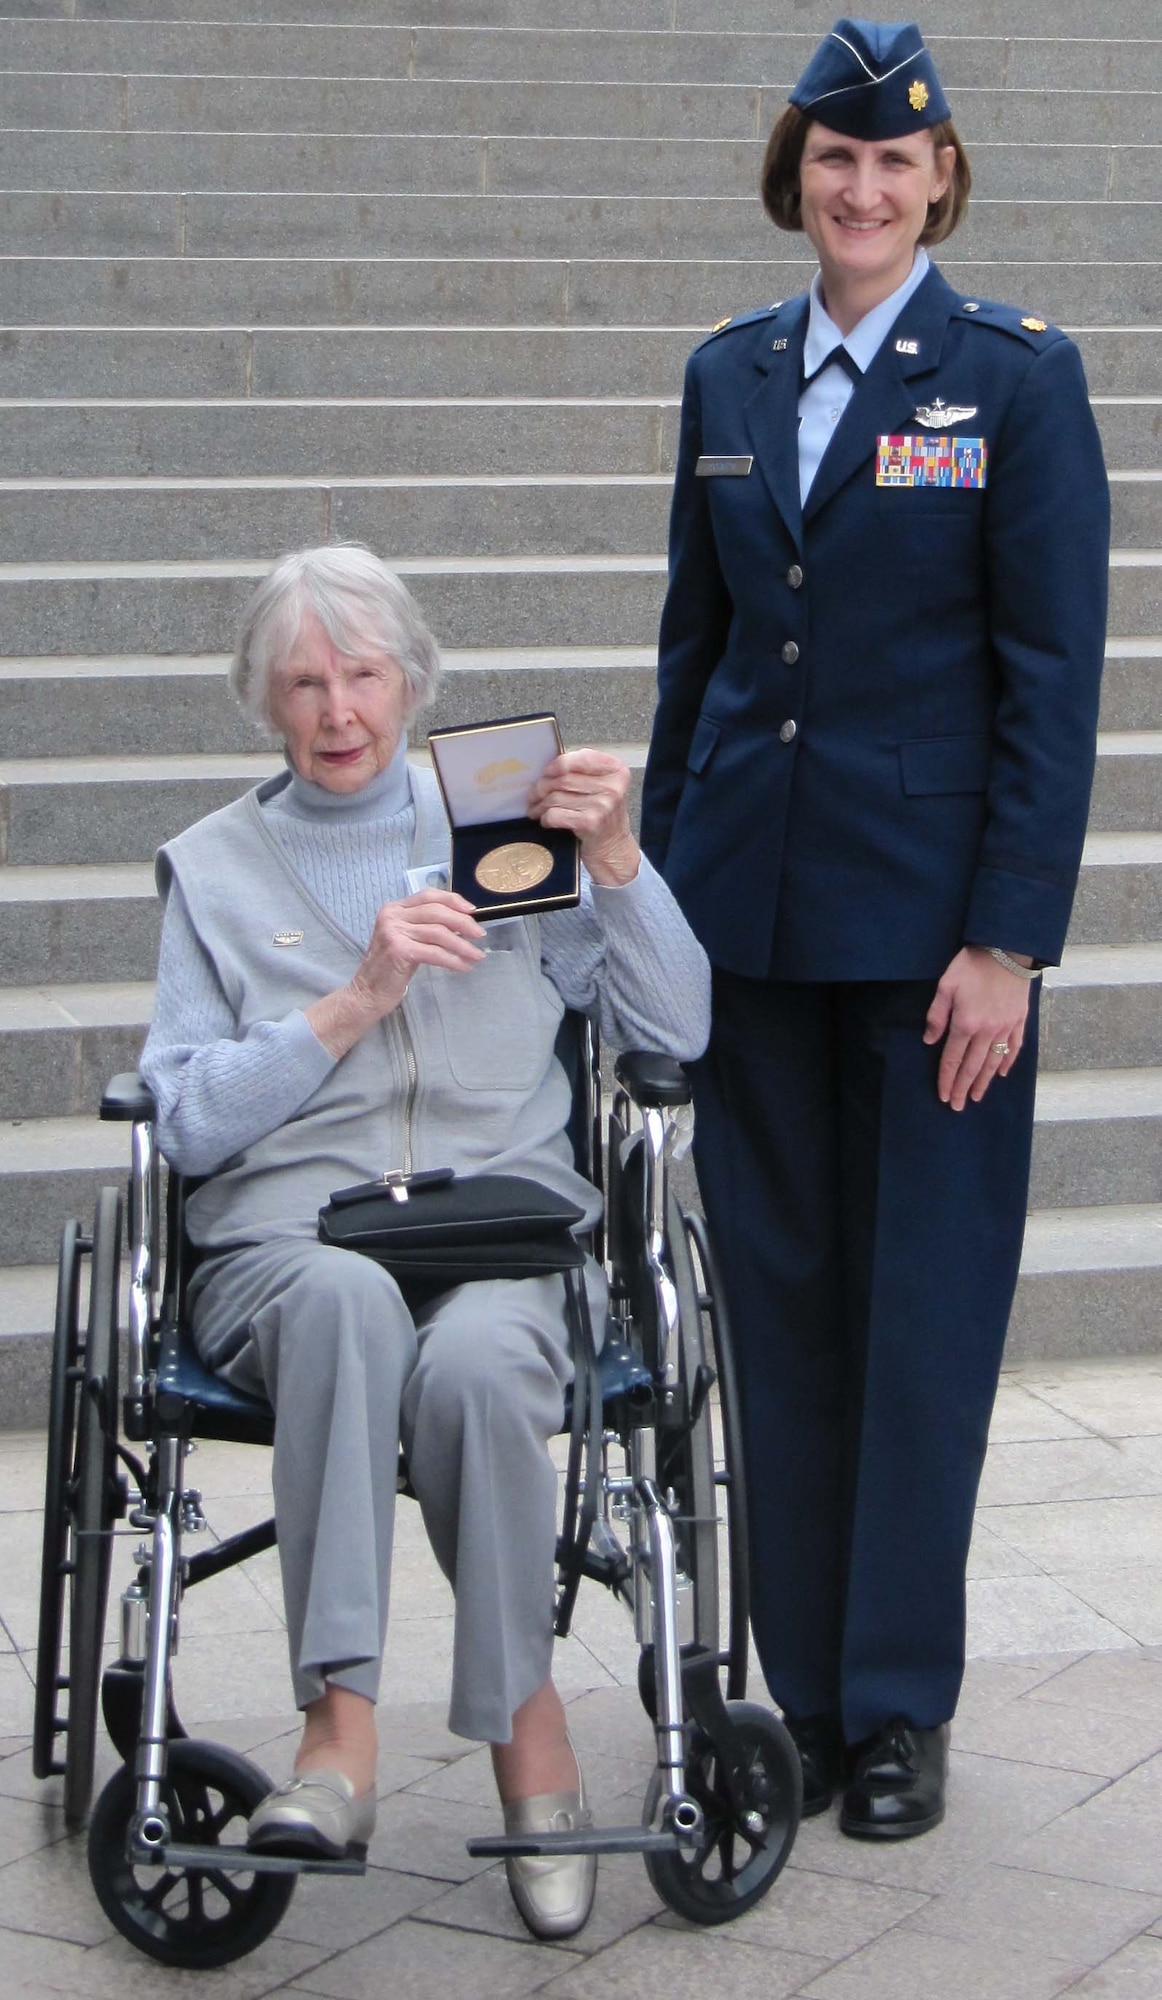 Ms. Phyllis Paradis, a Women Airforce Service Pilot, proudly displays her Congressional Gold Medal along with her military escort for the event, Maj. Leah Schmidt, 18th Air Refueling Squadron which is attached to the 931st Air Refueling Group, McConnell Air Force Base, Kan. Major Schmidt and members of all the branches escorted the attending WASPs at the ceremony and around other events held in the Washington D.C. area to honor the women aviators. (Courtesy Air Force Photo)